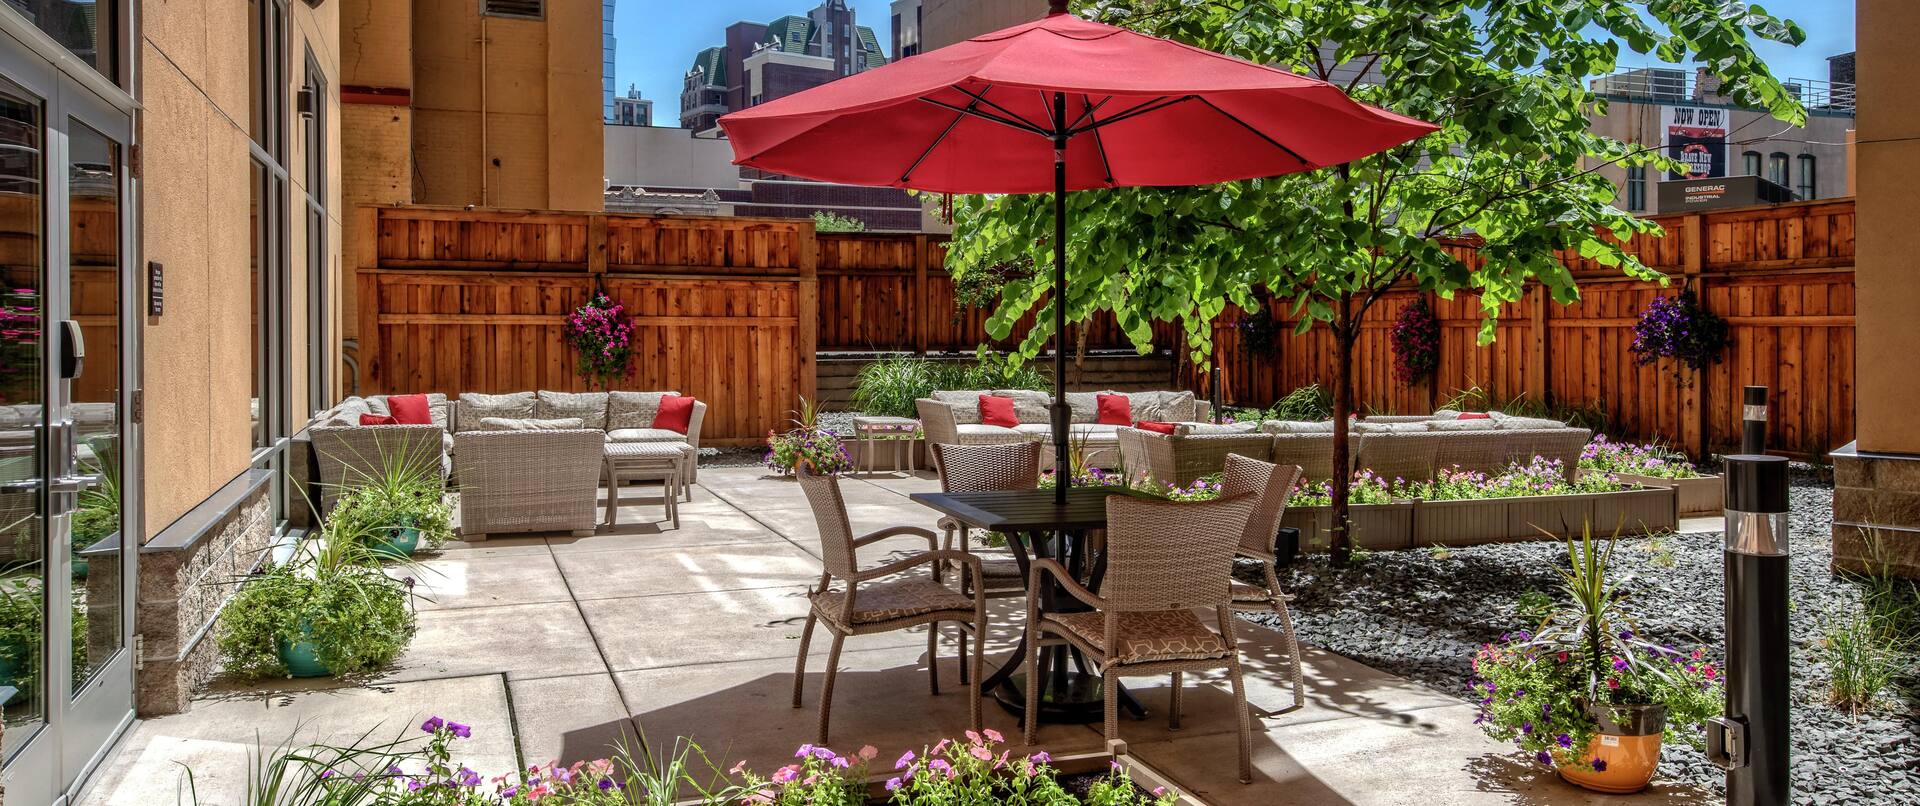 Outdoor Patio Area with Chairs, Tables and Umbrella at Daytime